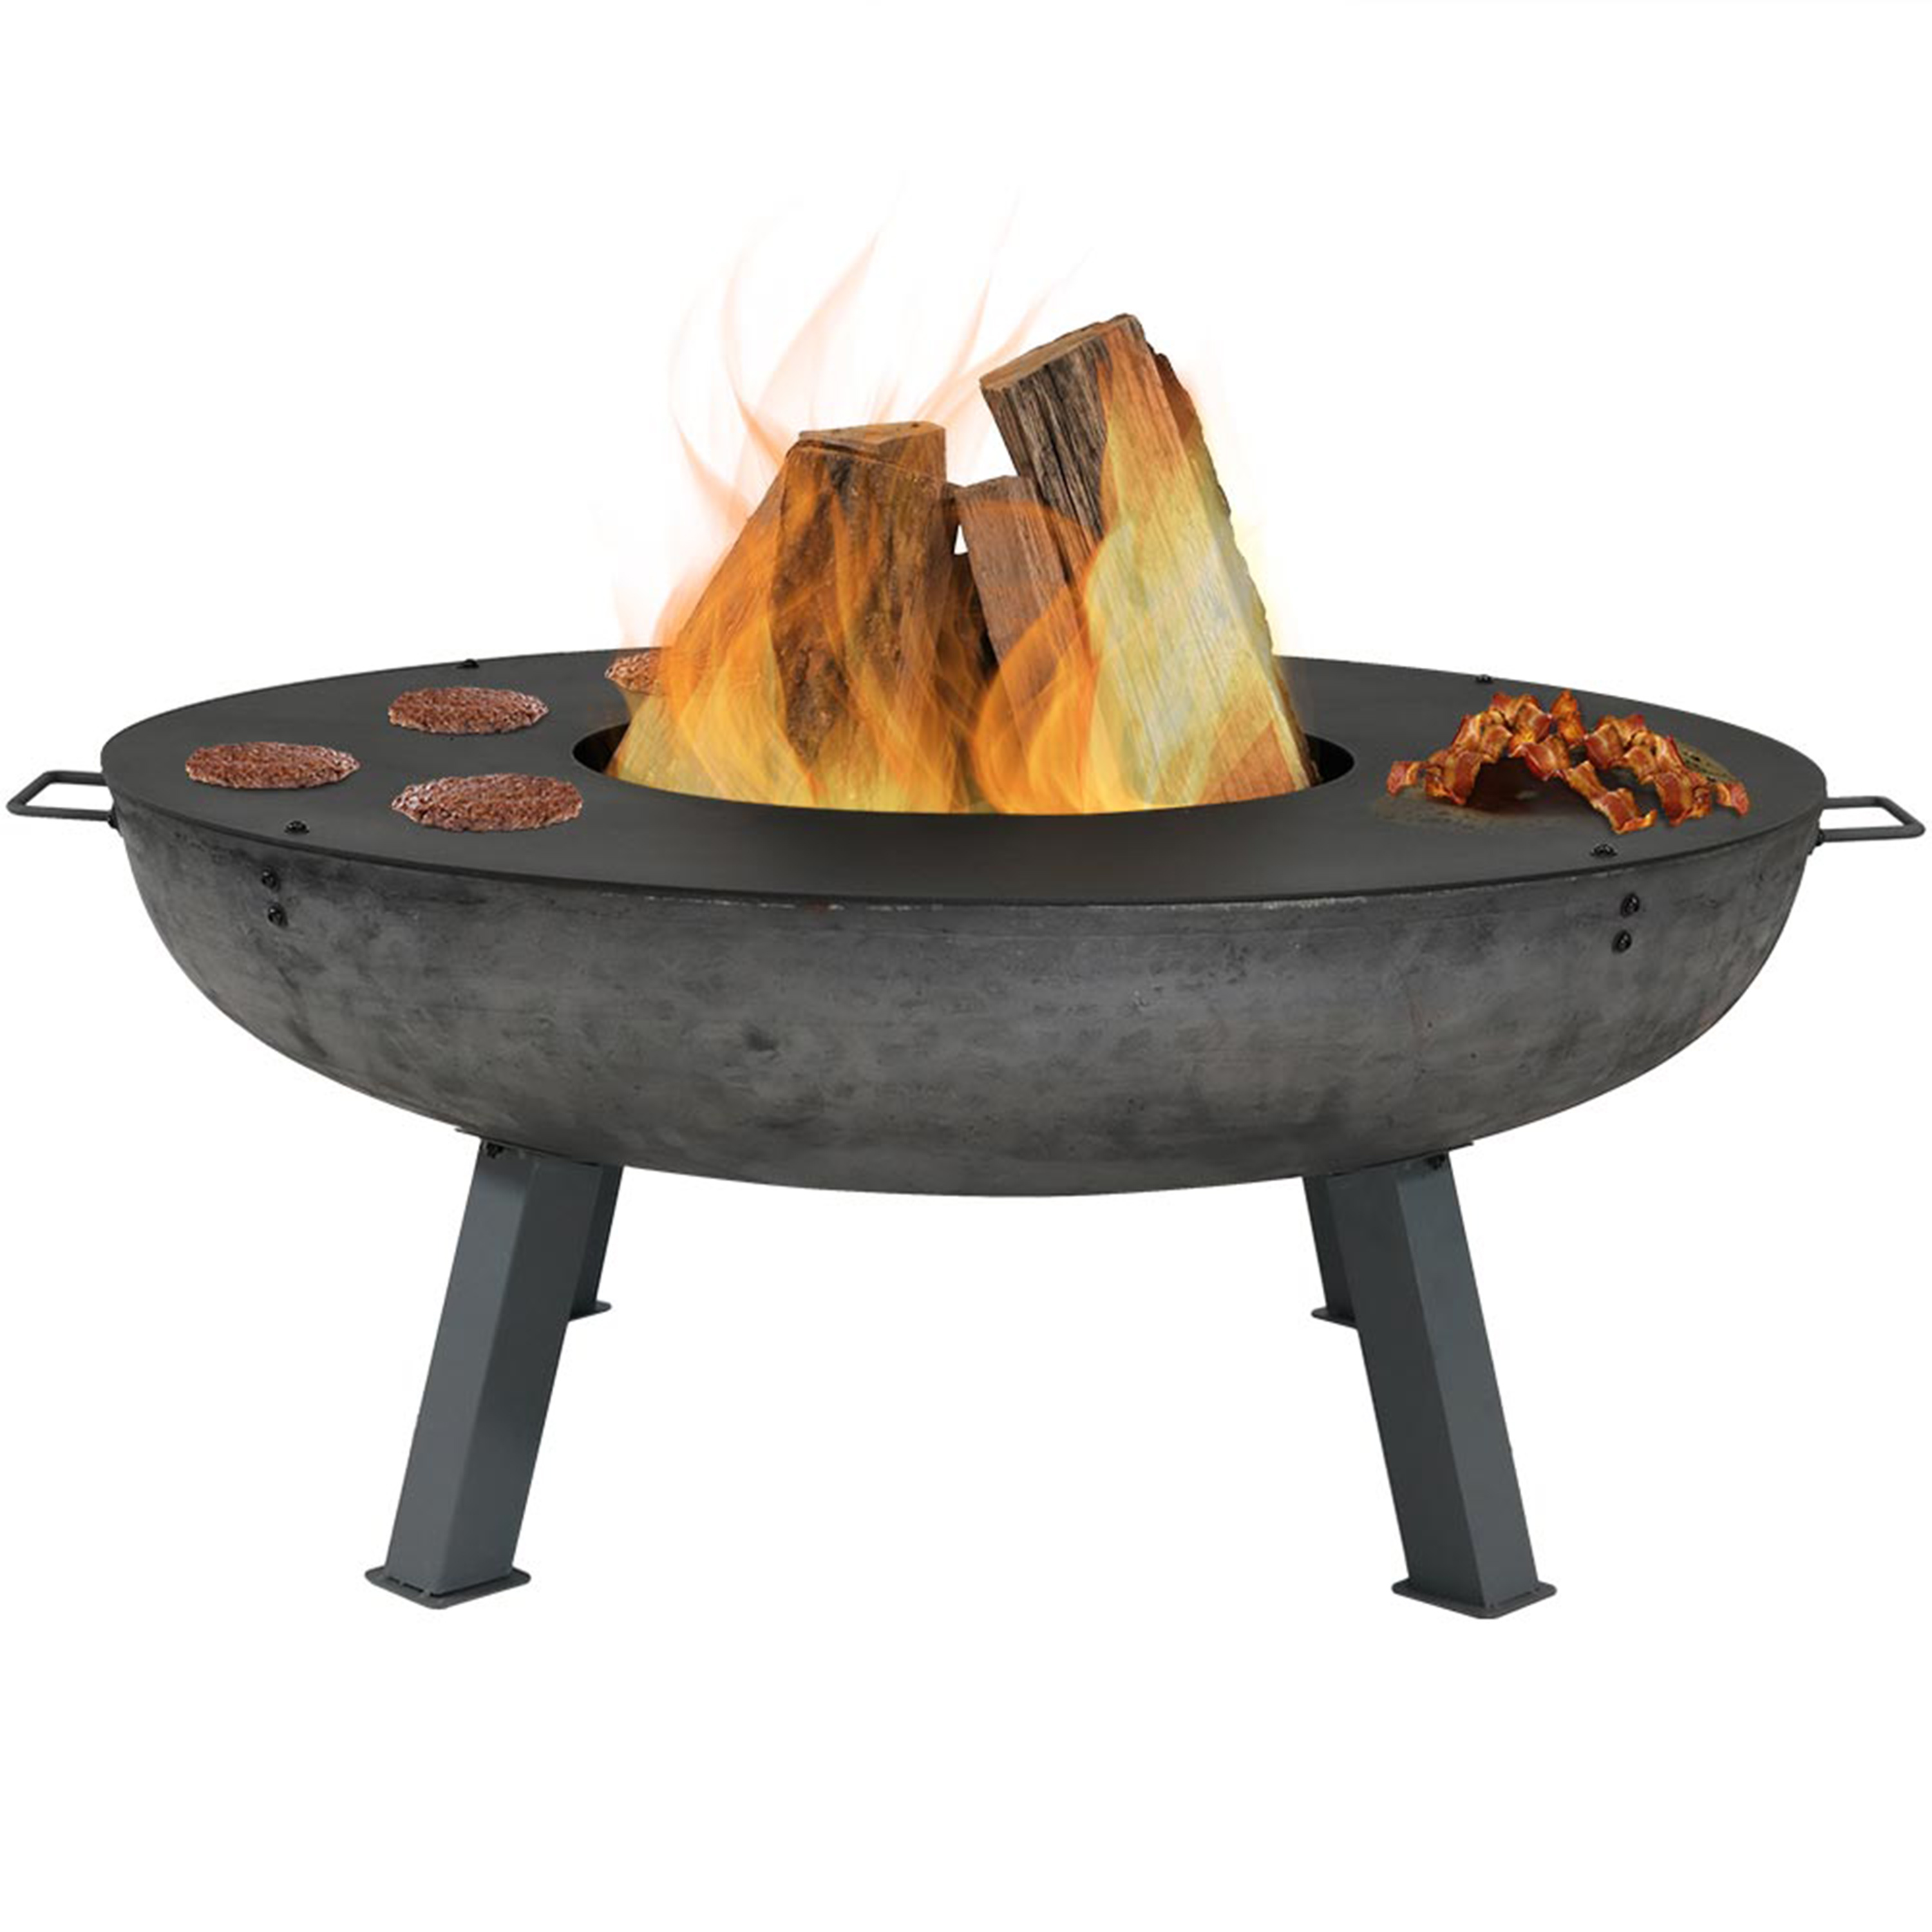 Sunnydaze Fire Pit Cast Iron Wood-Burning Fire Bowl with Cooking Ledge - 40-Inch